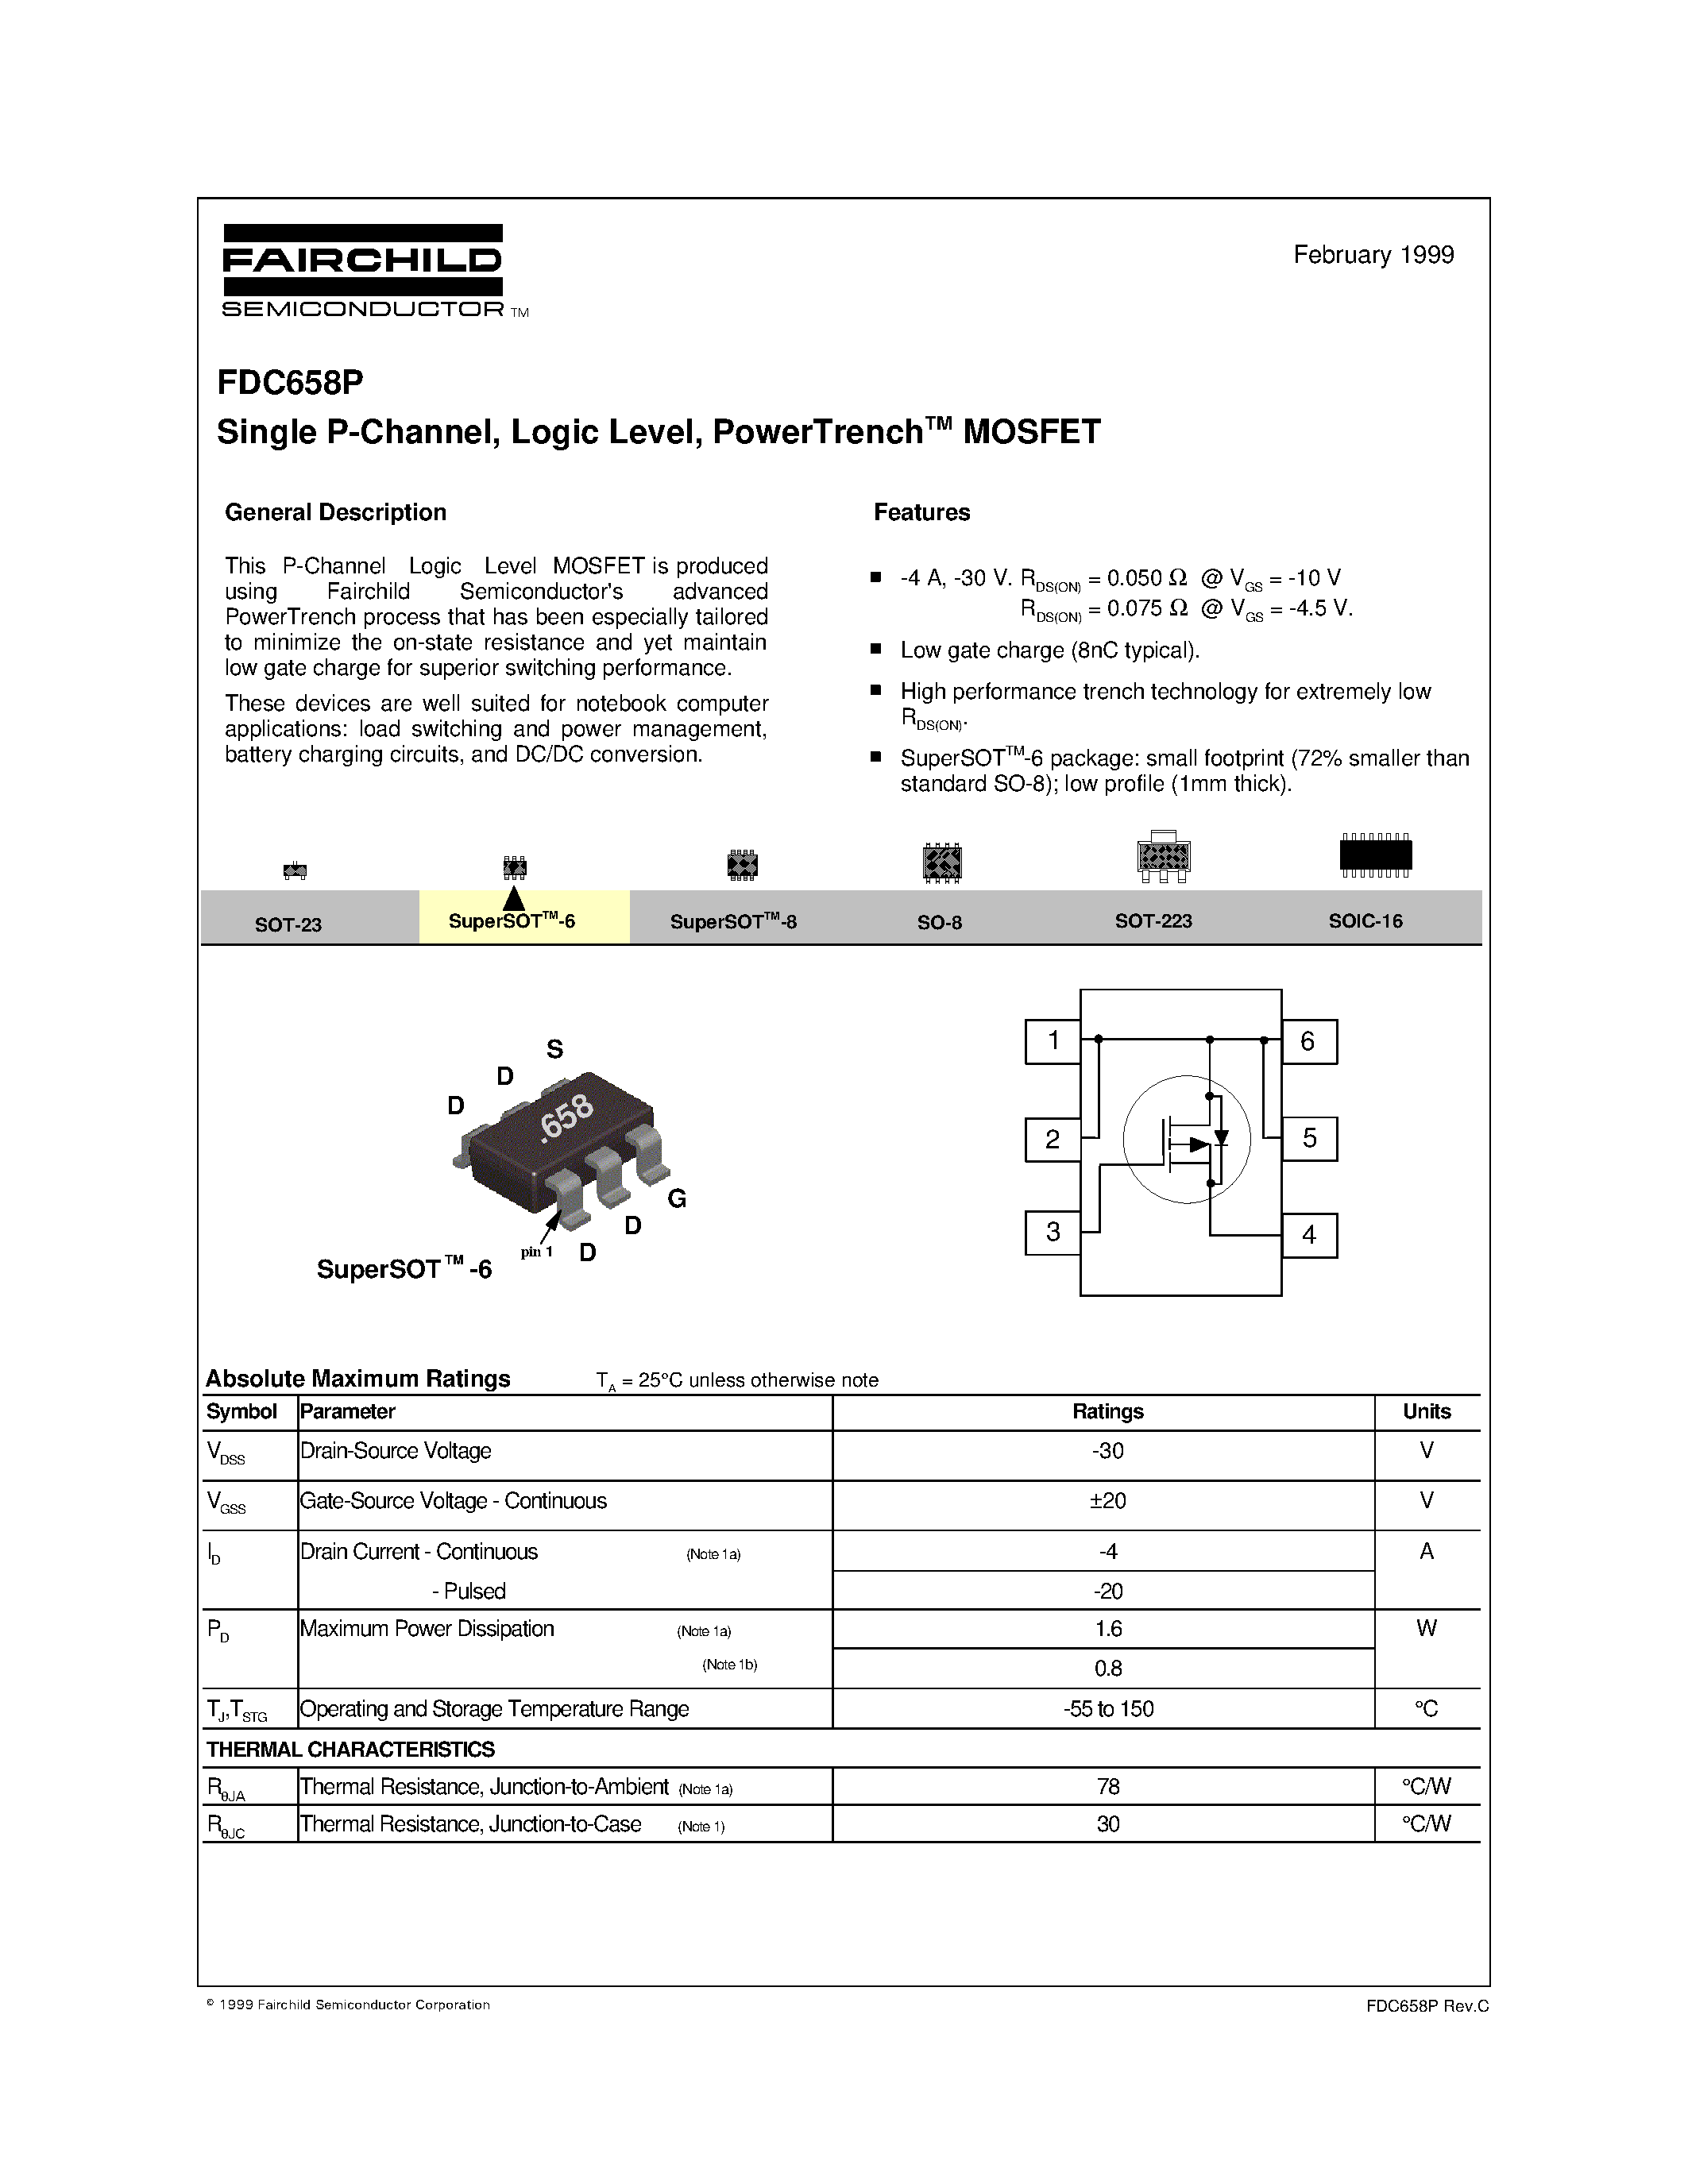 Datasheet FDC658P - Single P-Channel/ Logic Level/ PowerTrenchTM MOSFET page 1